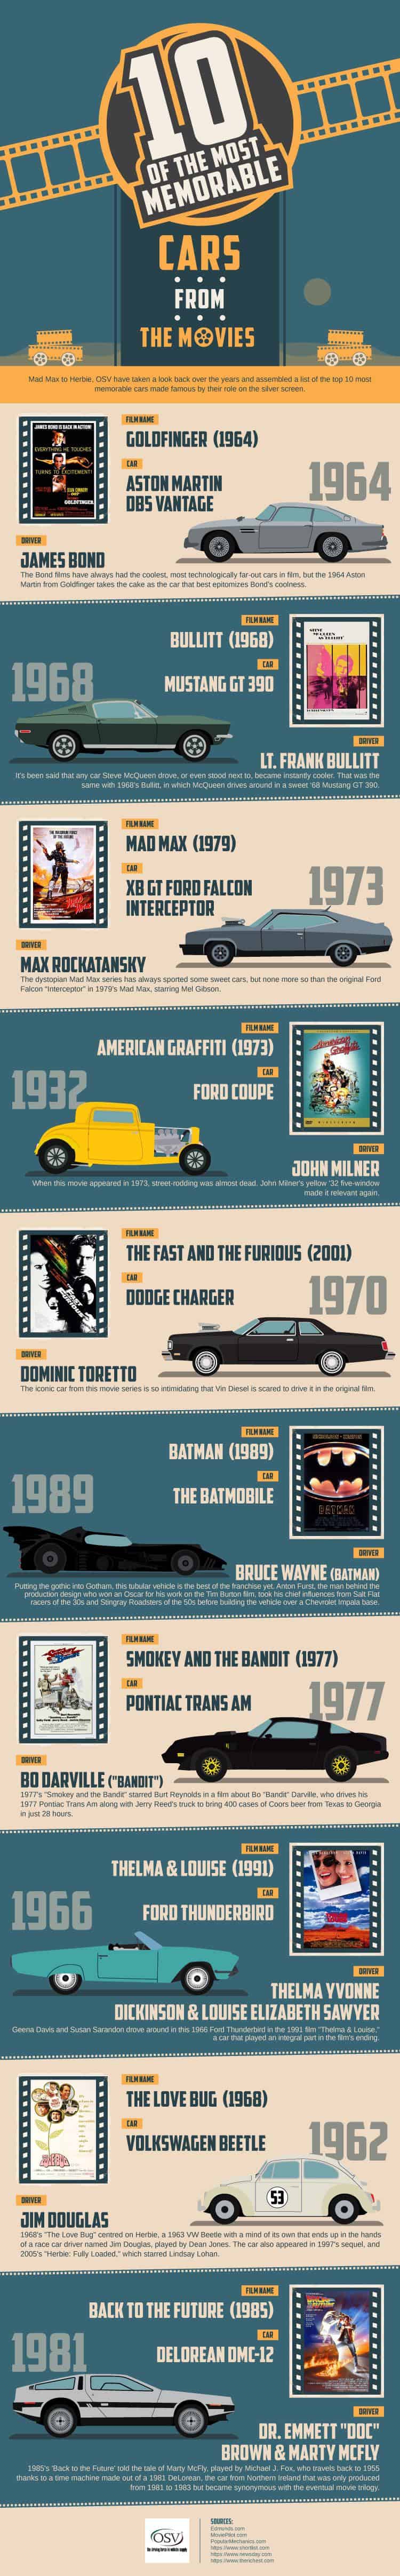 10 of the Most Memorable Cars From the Movies